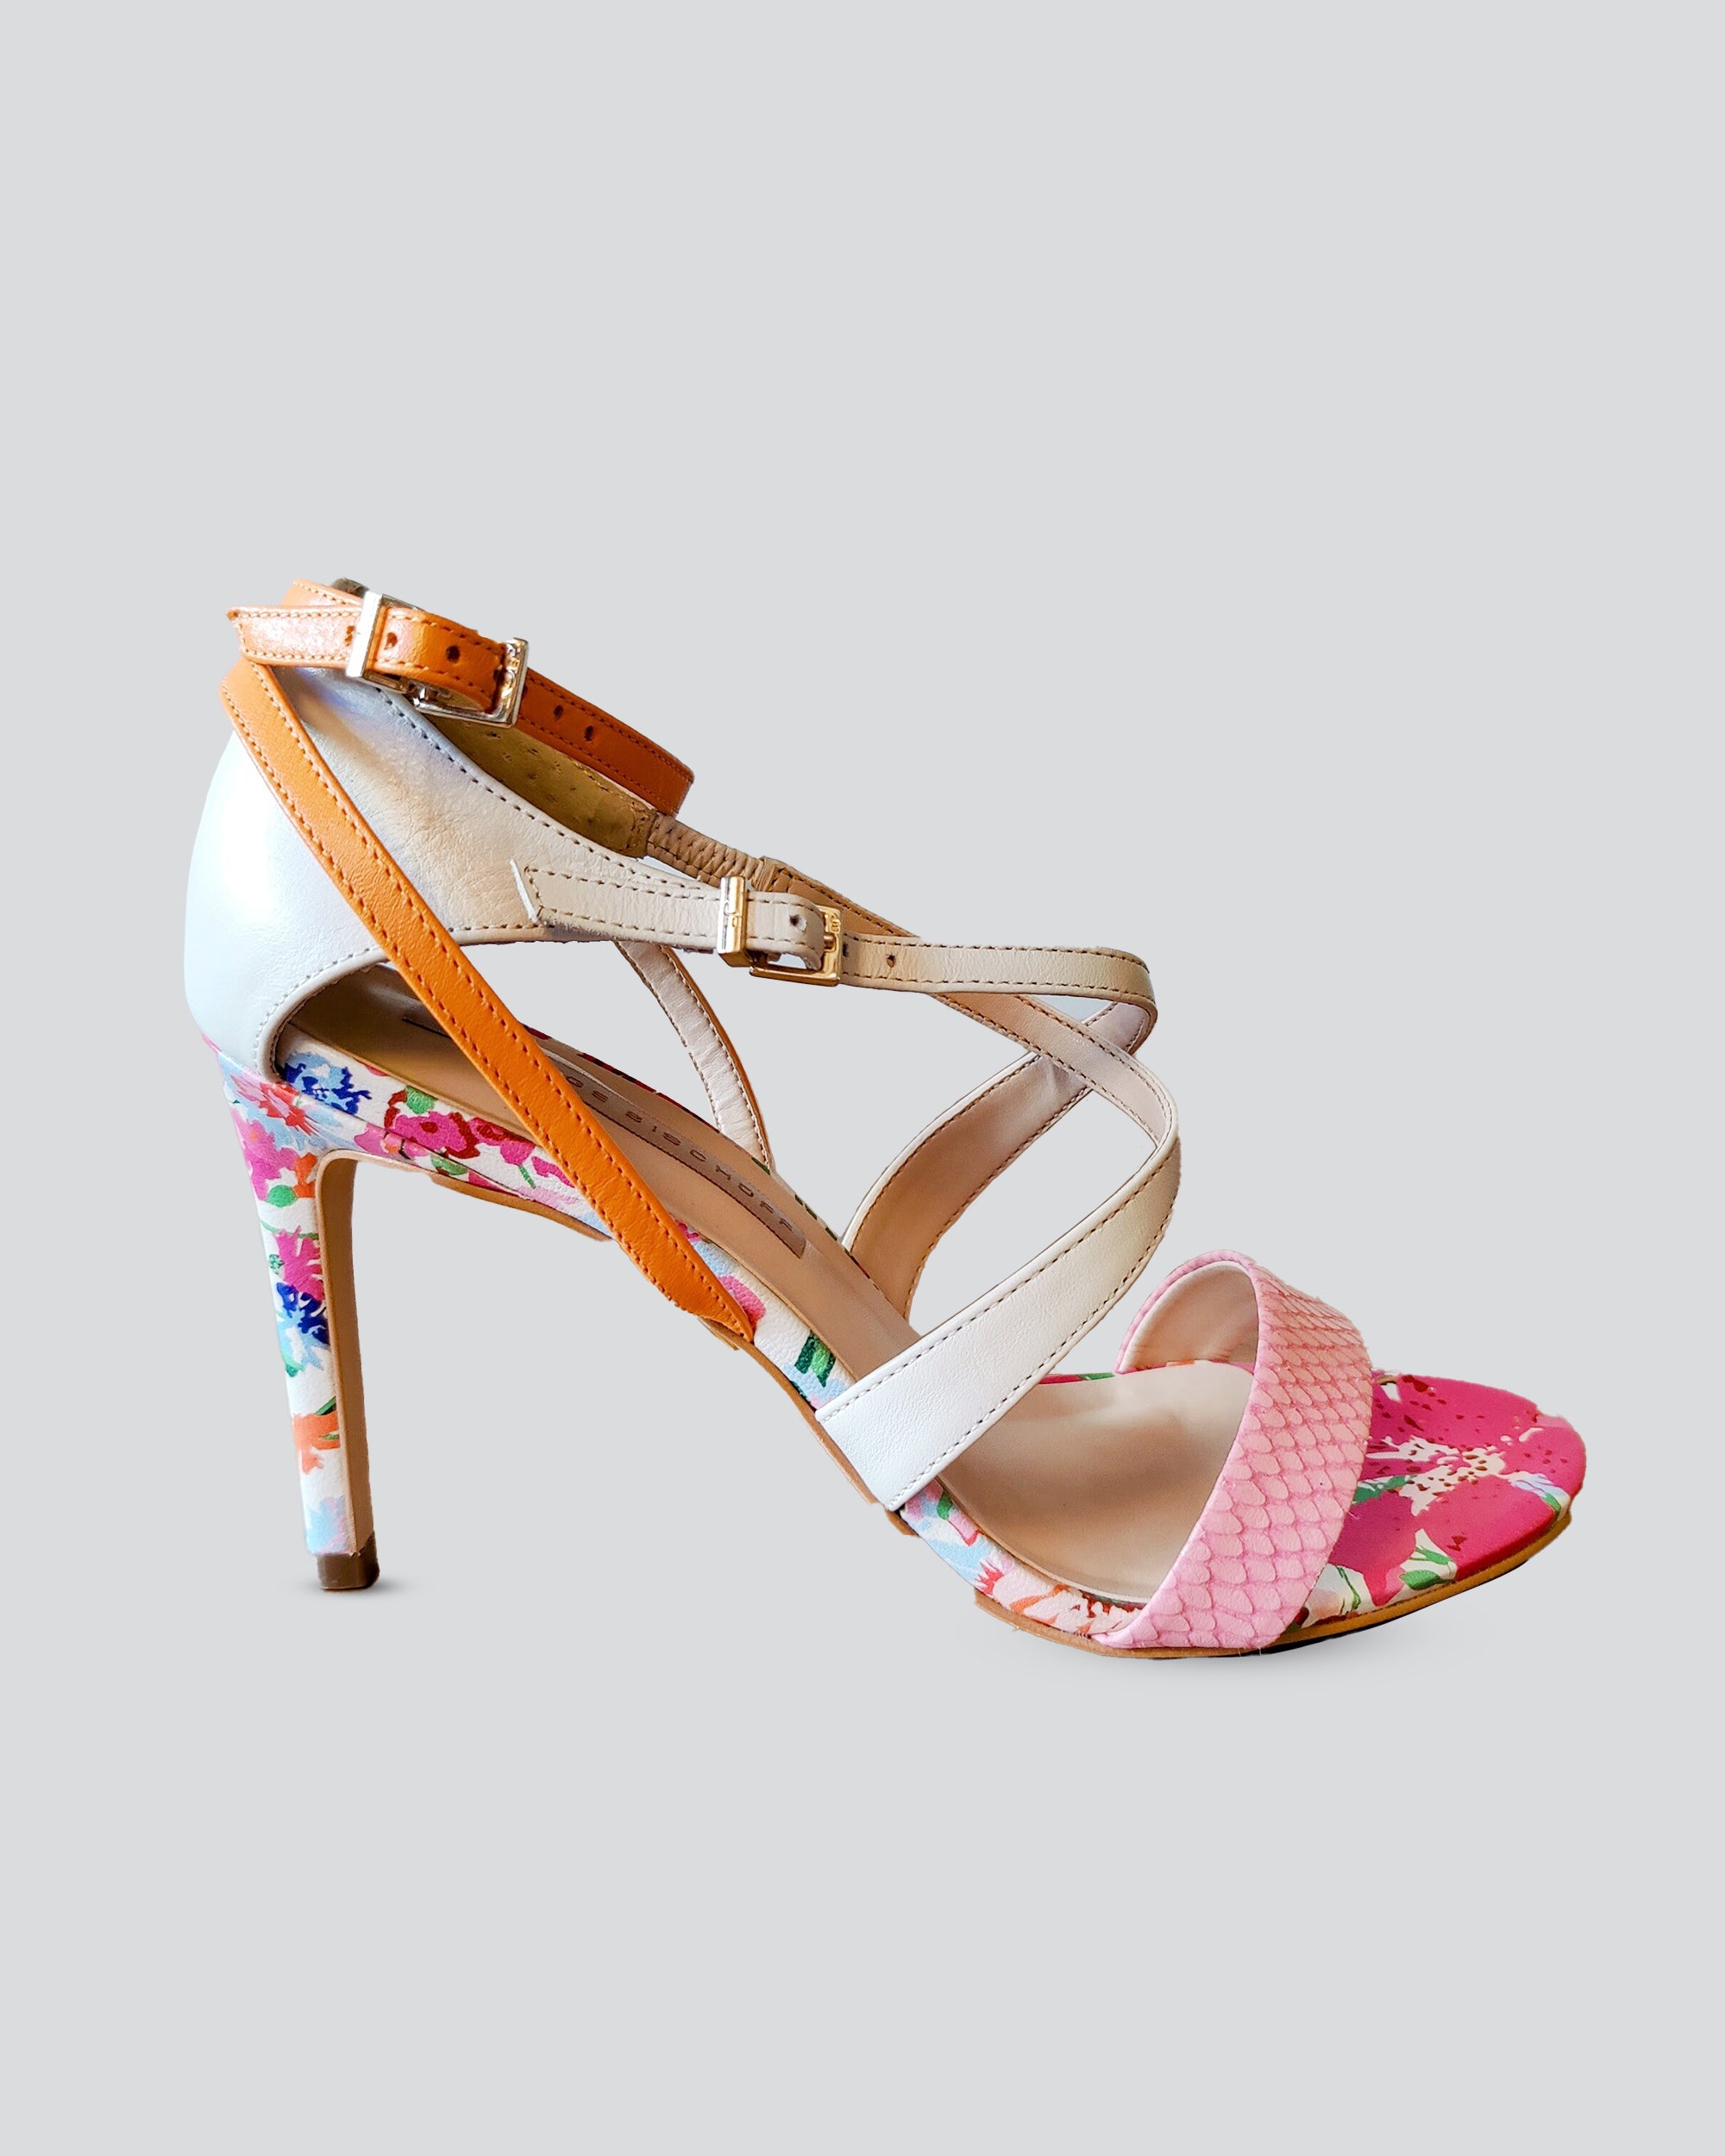 Floral Sandal with Double Strap